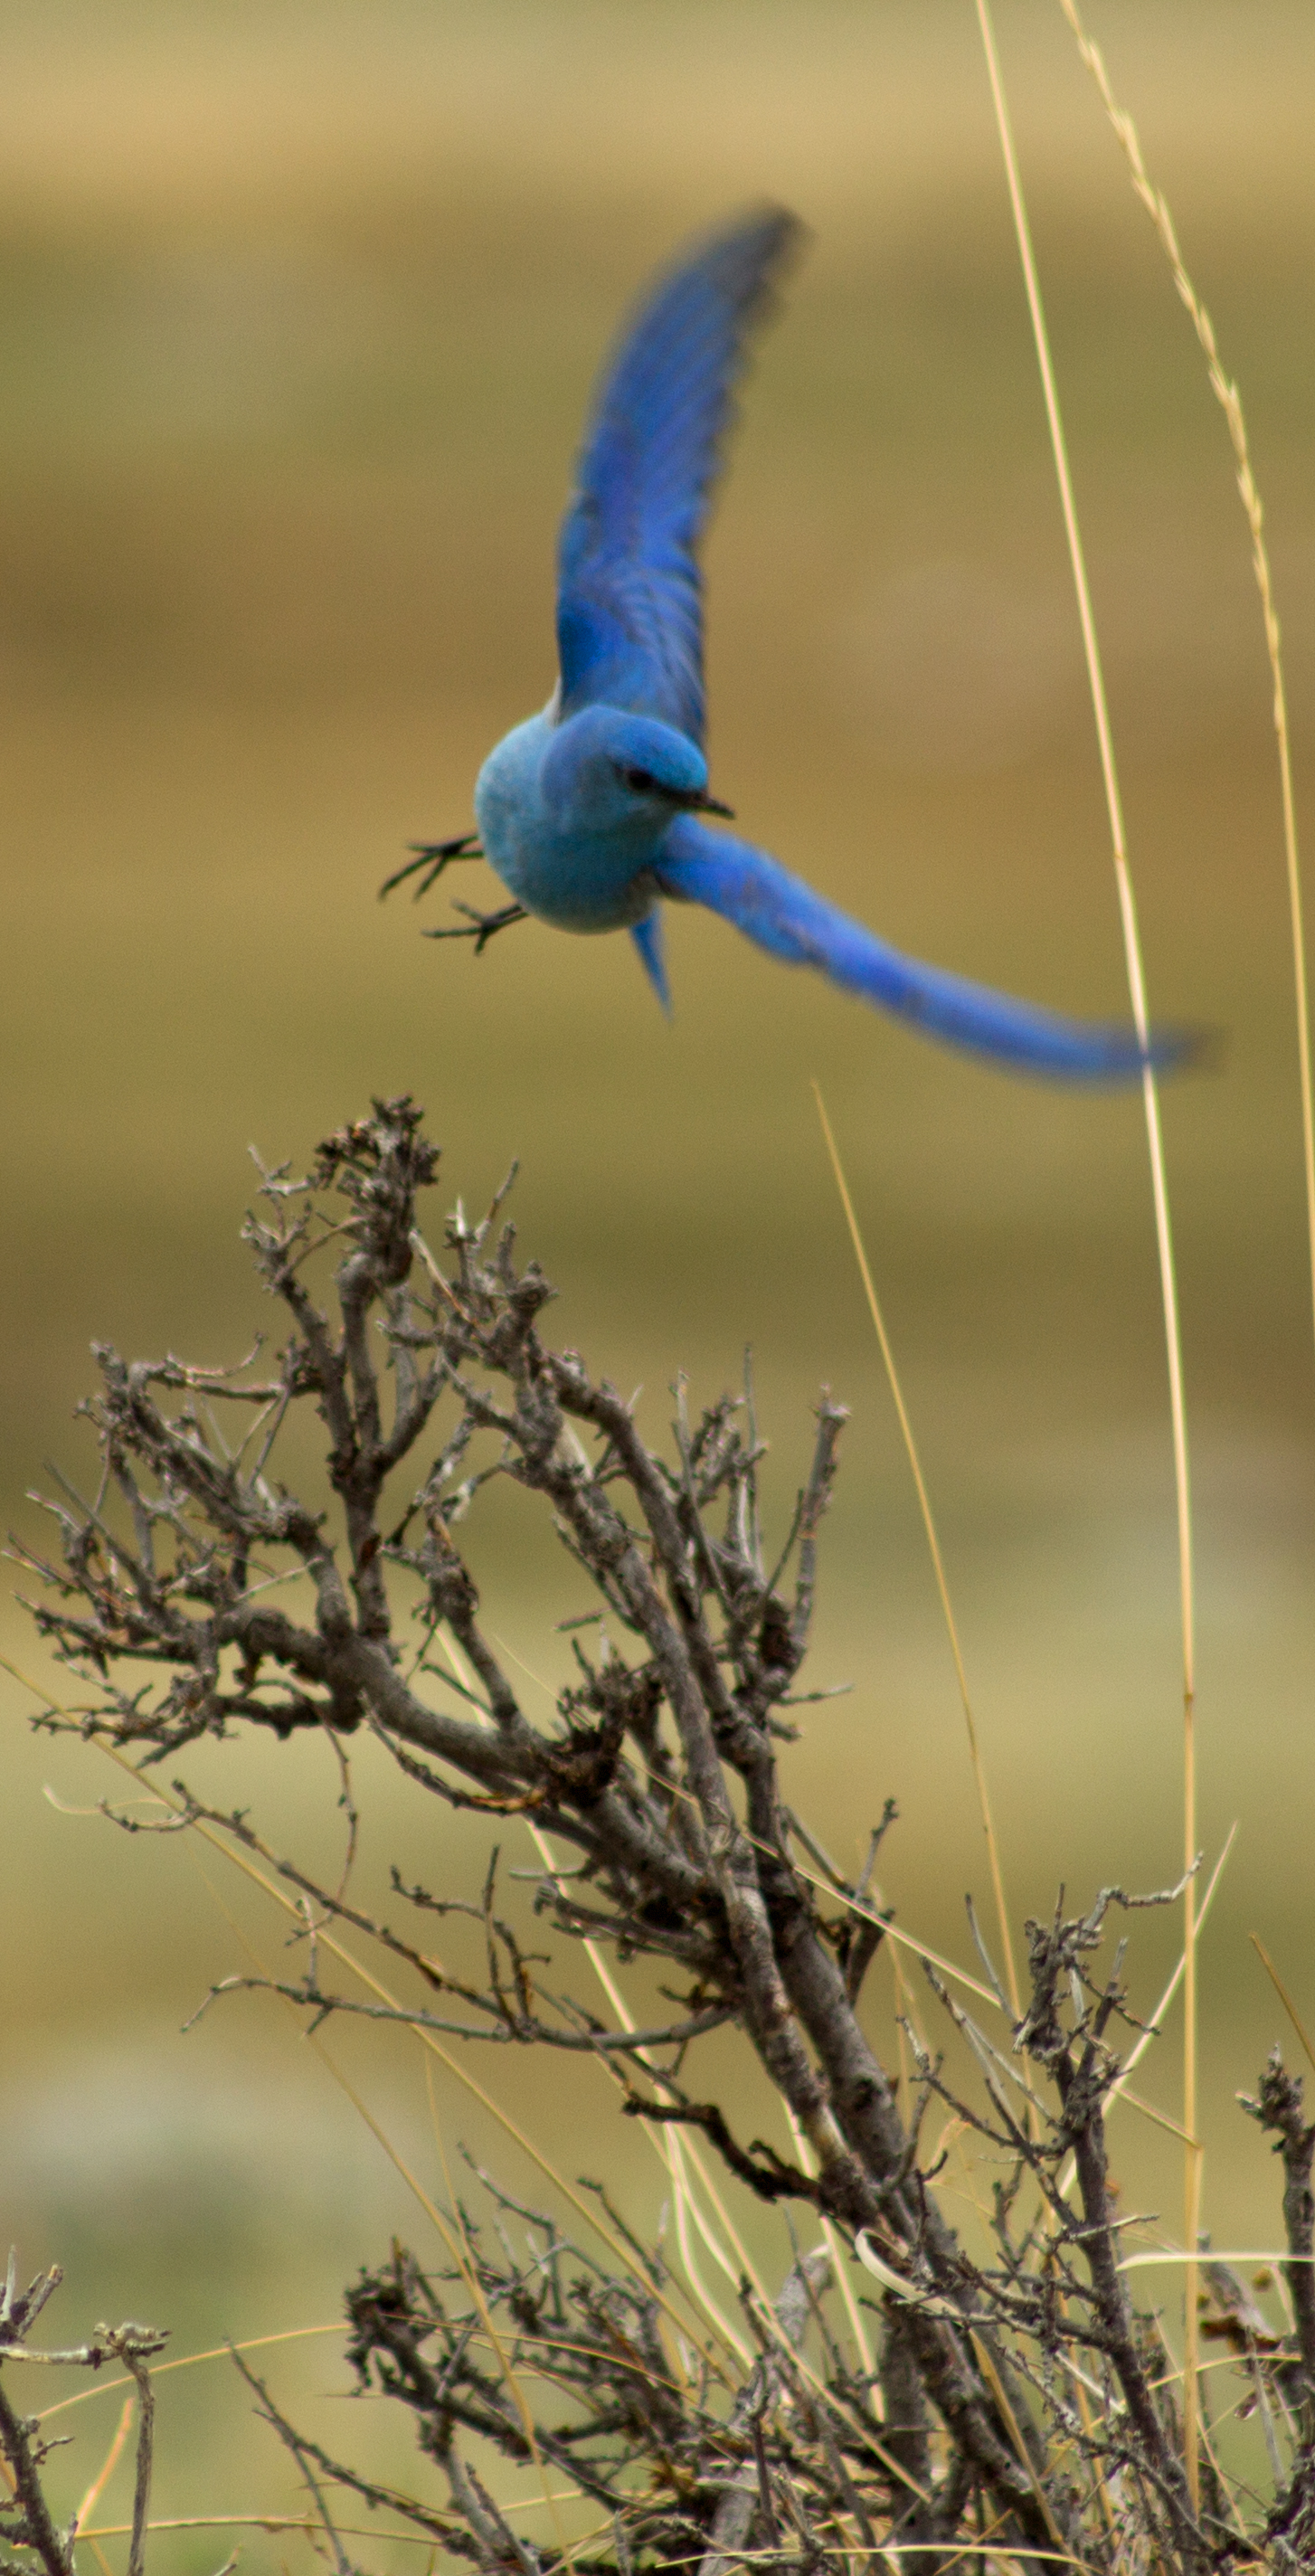 Don't you wish you could fly like a bluebird and maybe catch a worm ...